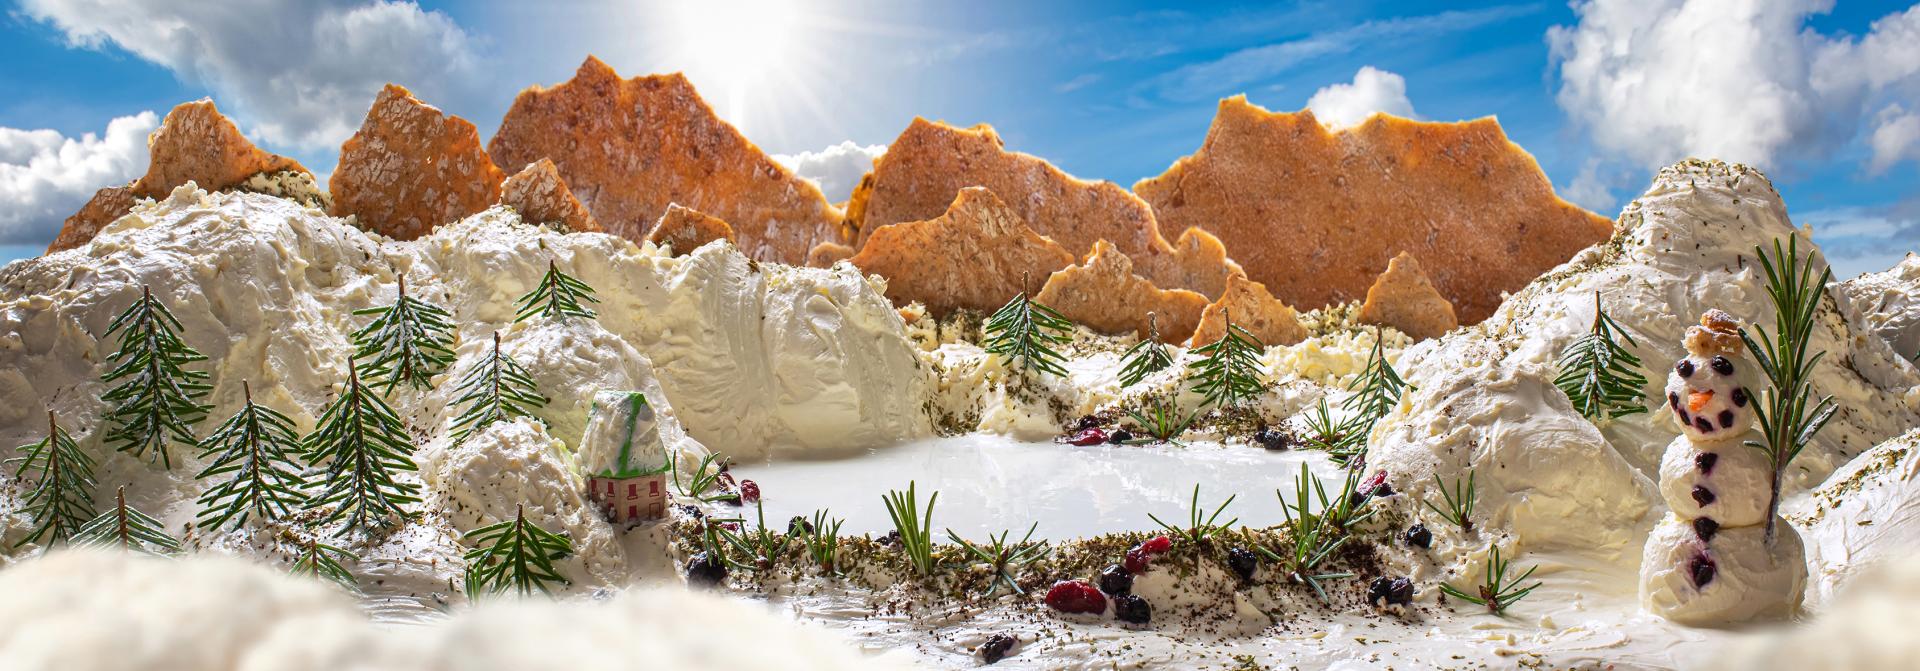 European Photography Awards Winner - Foodscapes